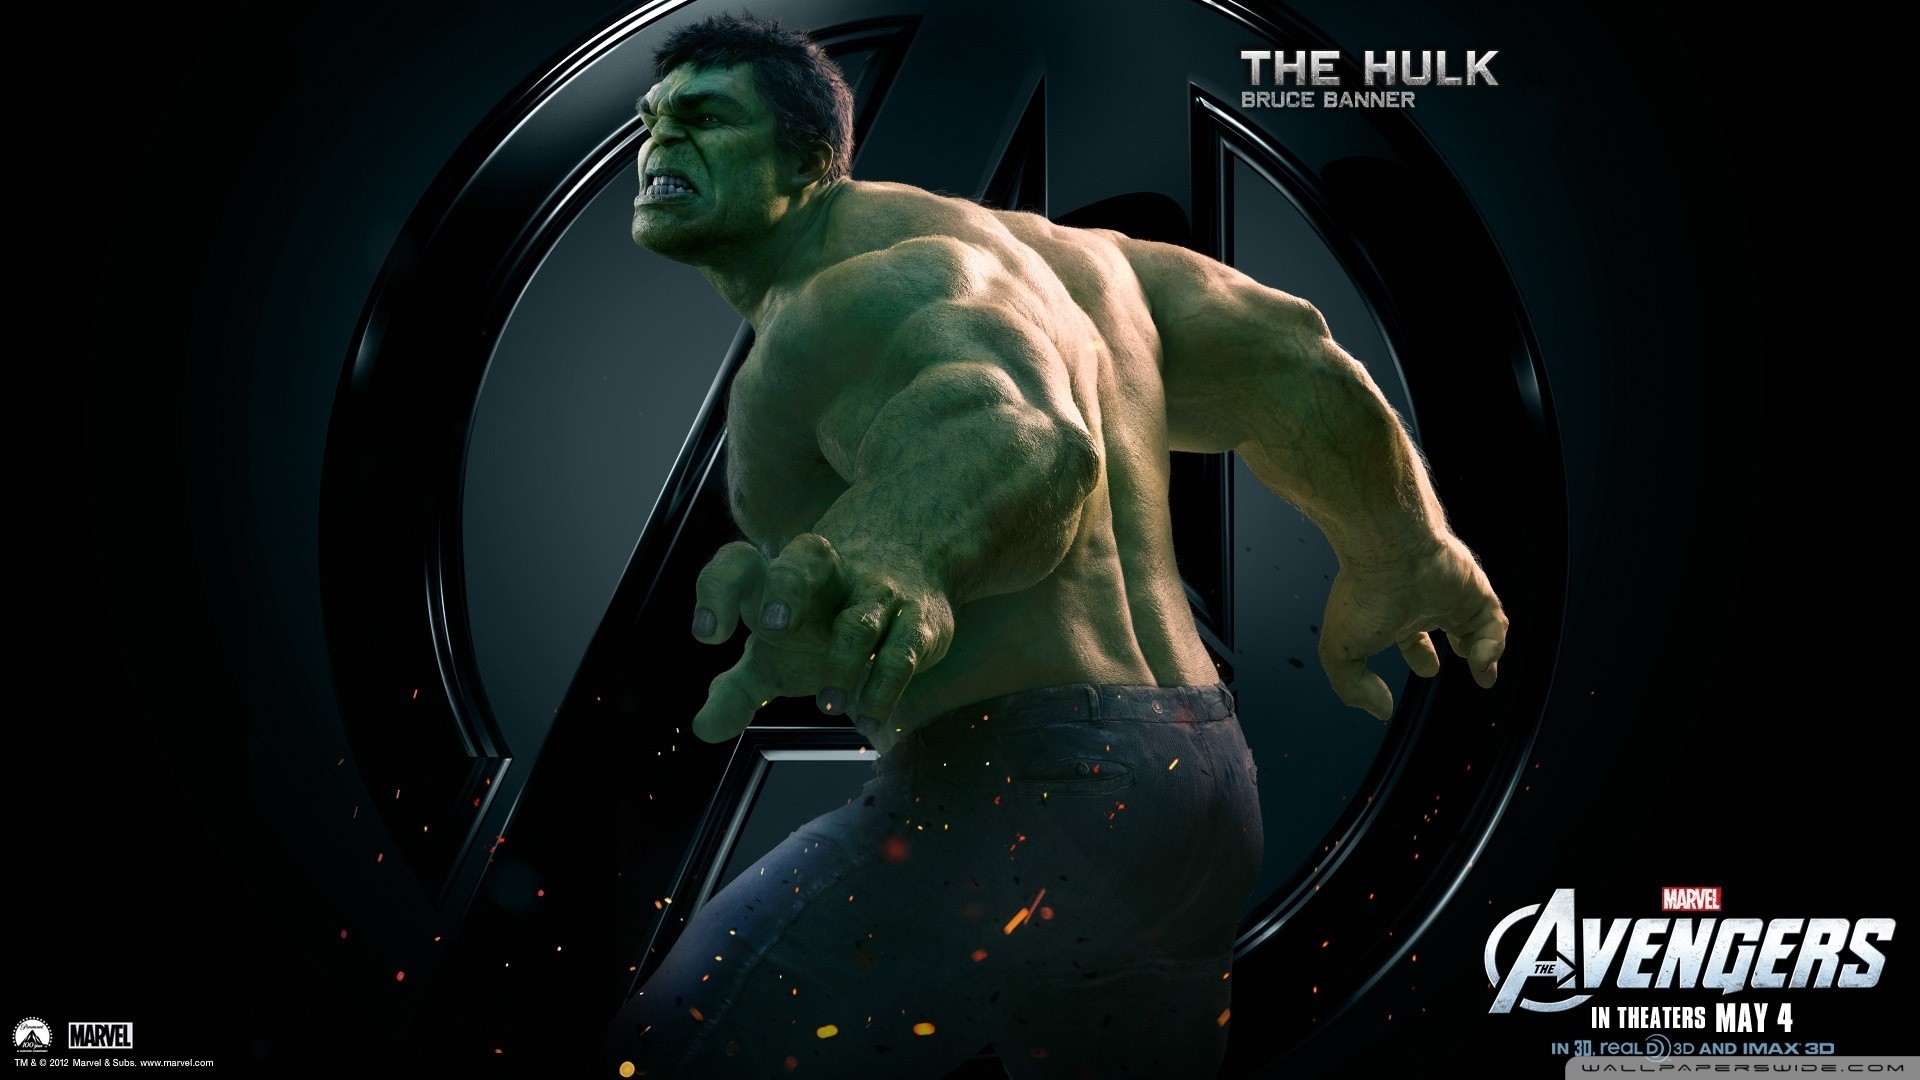 General 1920x1080 movies The Avengers Hulk Marvel Cinematic Universe Bruce Banner green skin